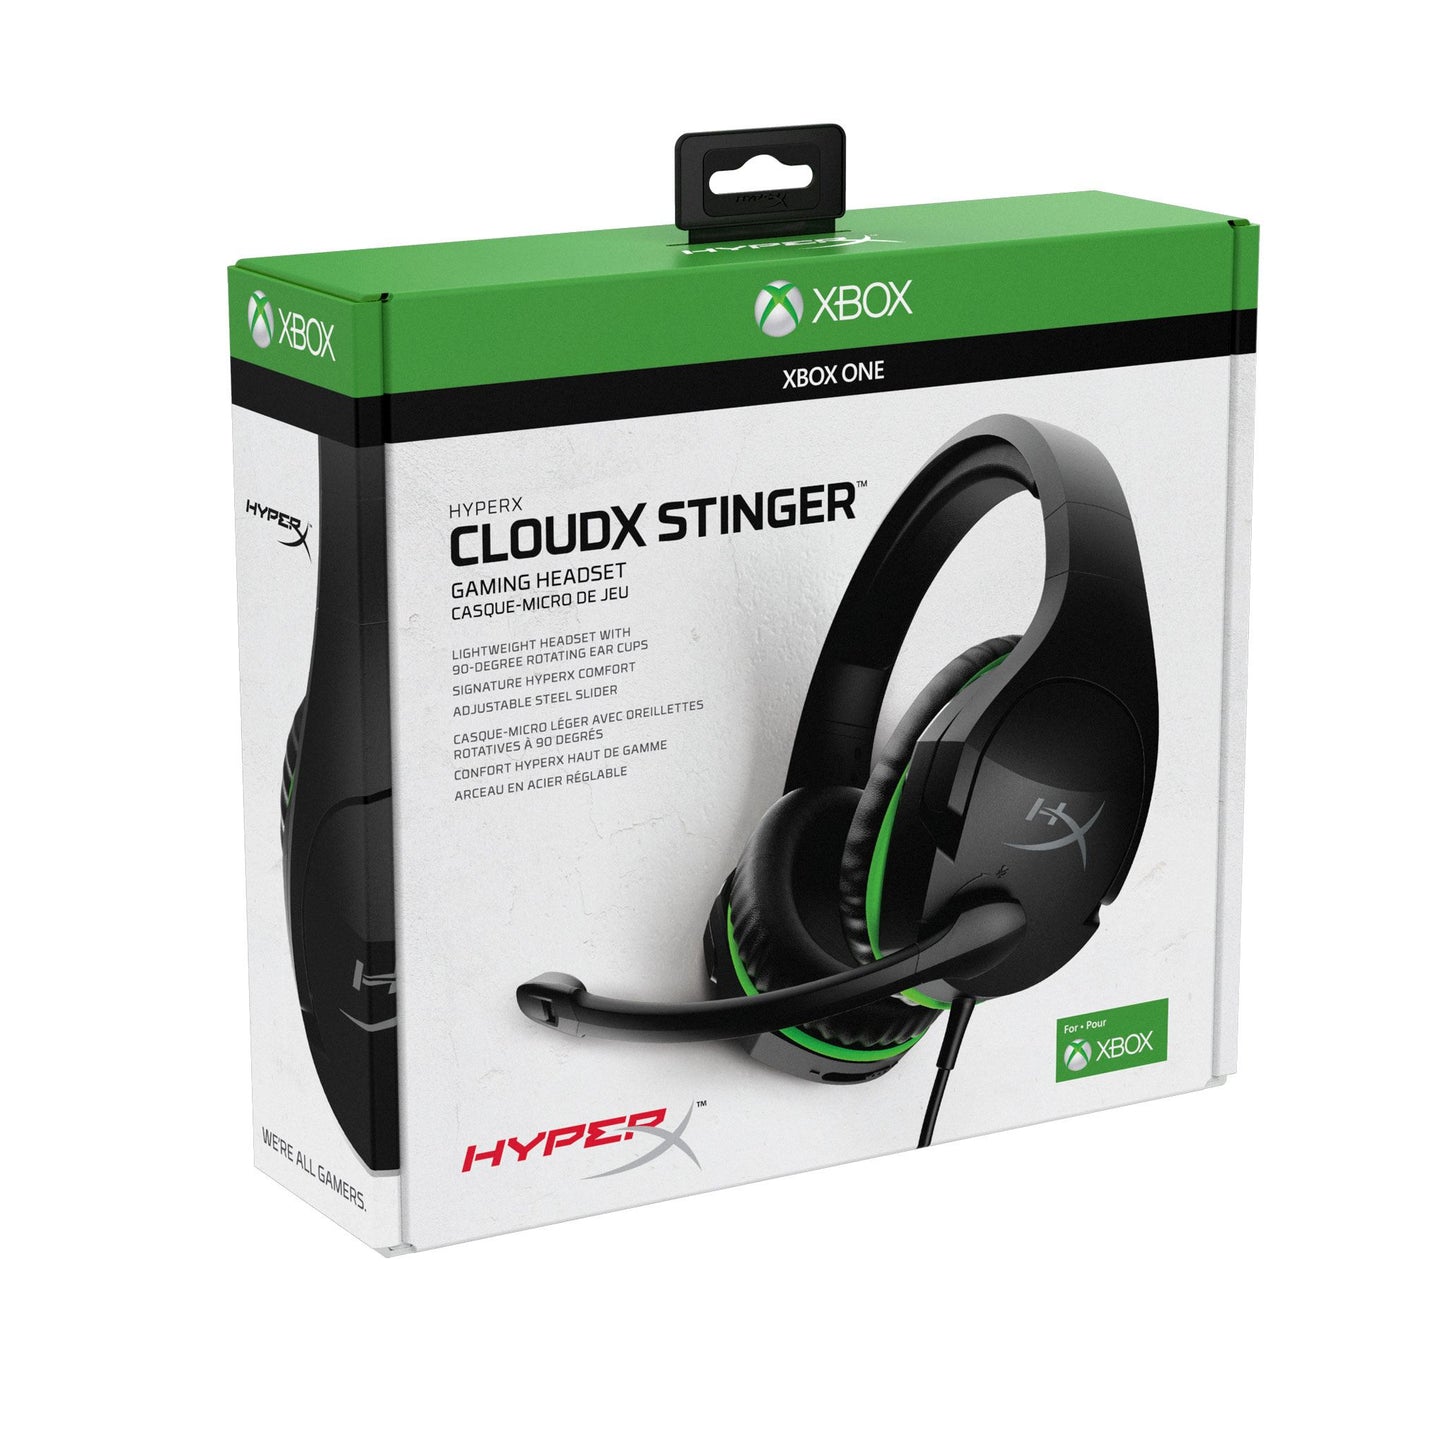 HyperX CloudX Stinger Wired Gaming Headset for Xbox One/Series X|S SpadezStore